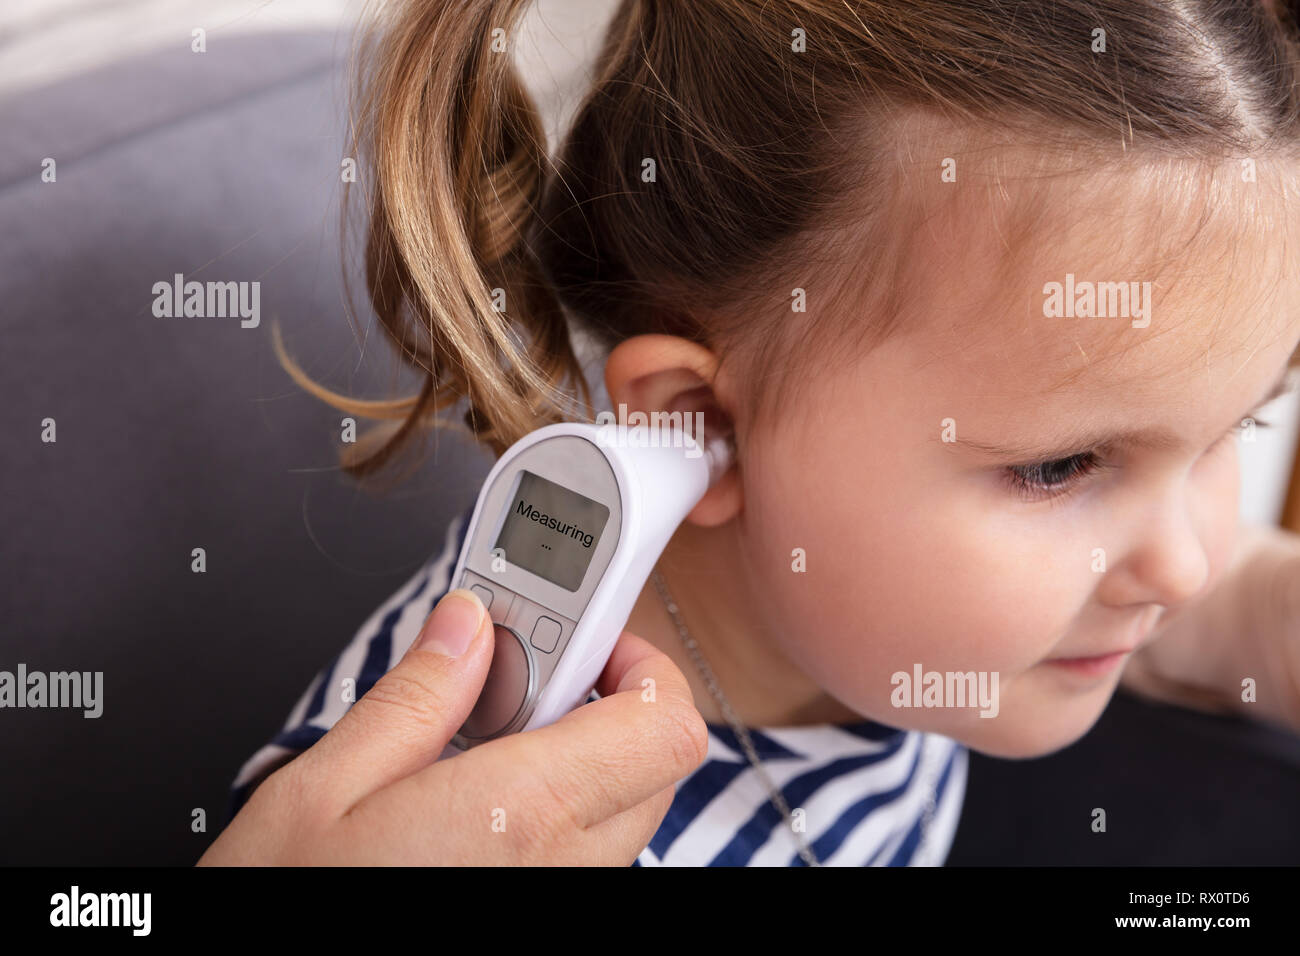 Close-up Of Hand Checking Girl's Ear With Digital Thermometer Stock Photo